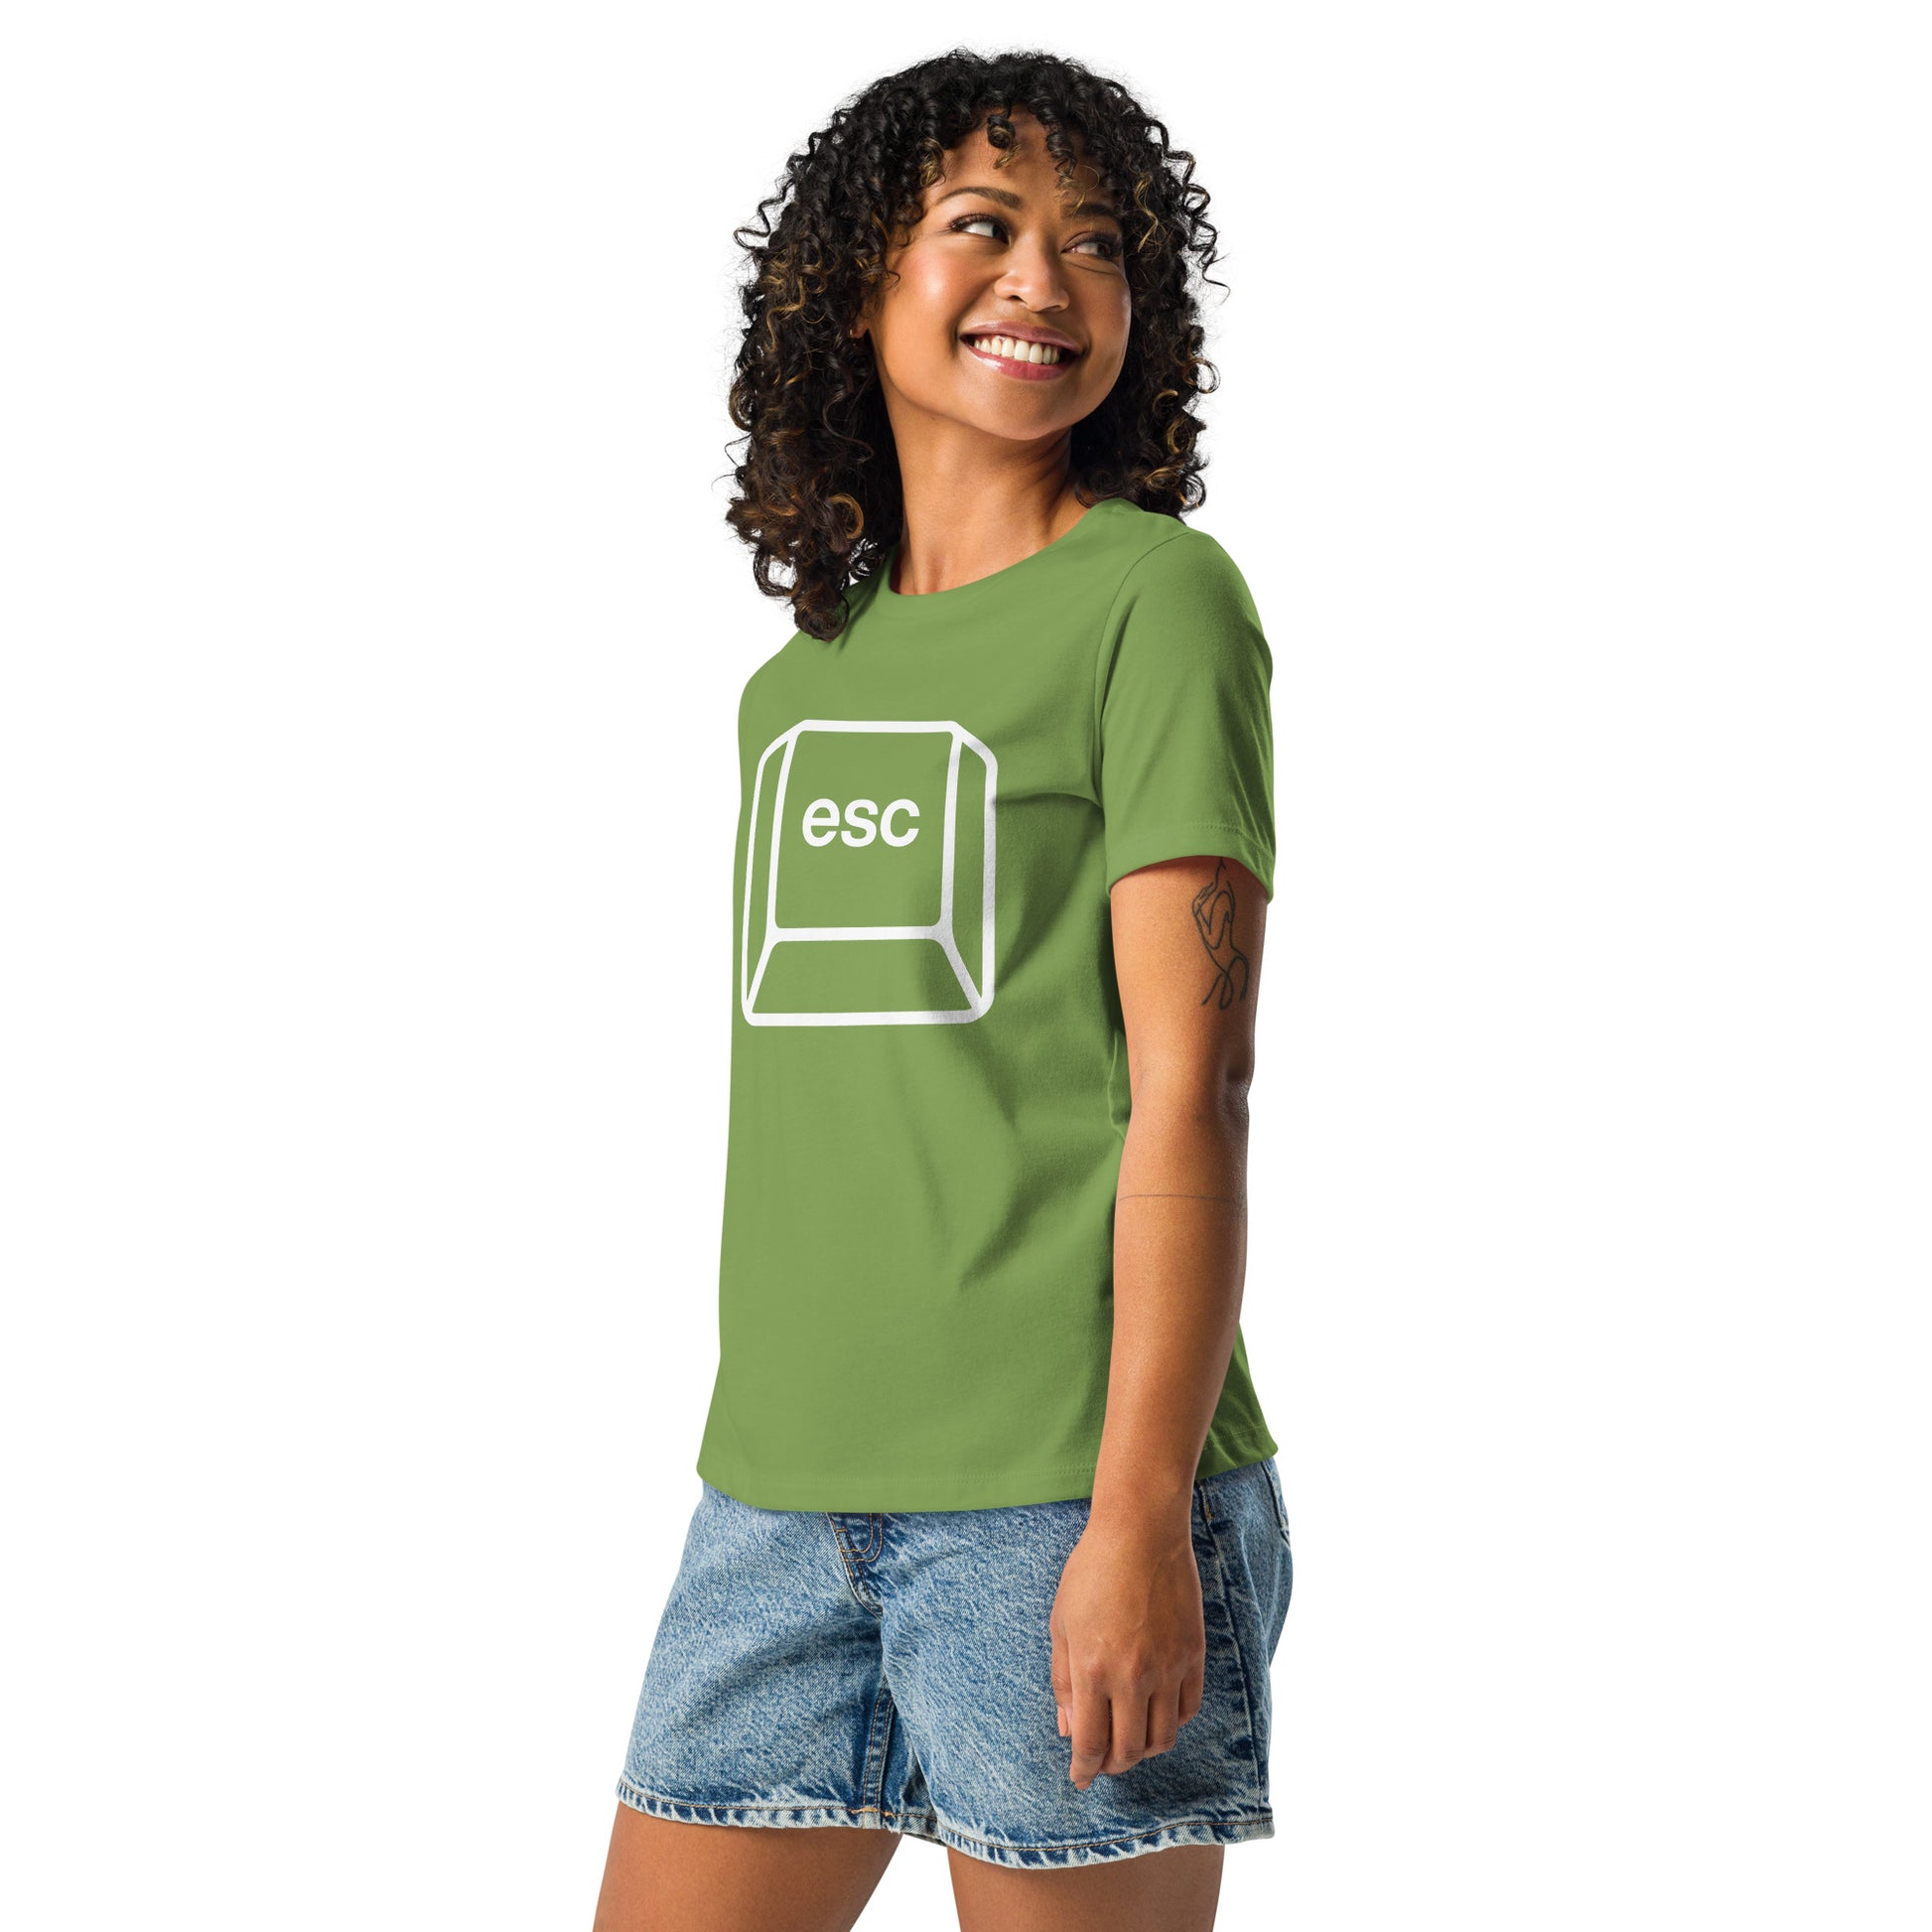 Woman with leaf green t-shirt with picture of esc key